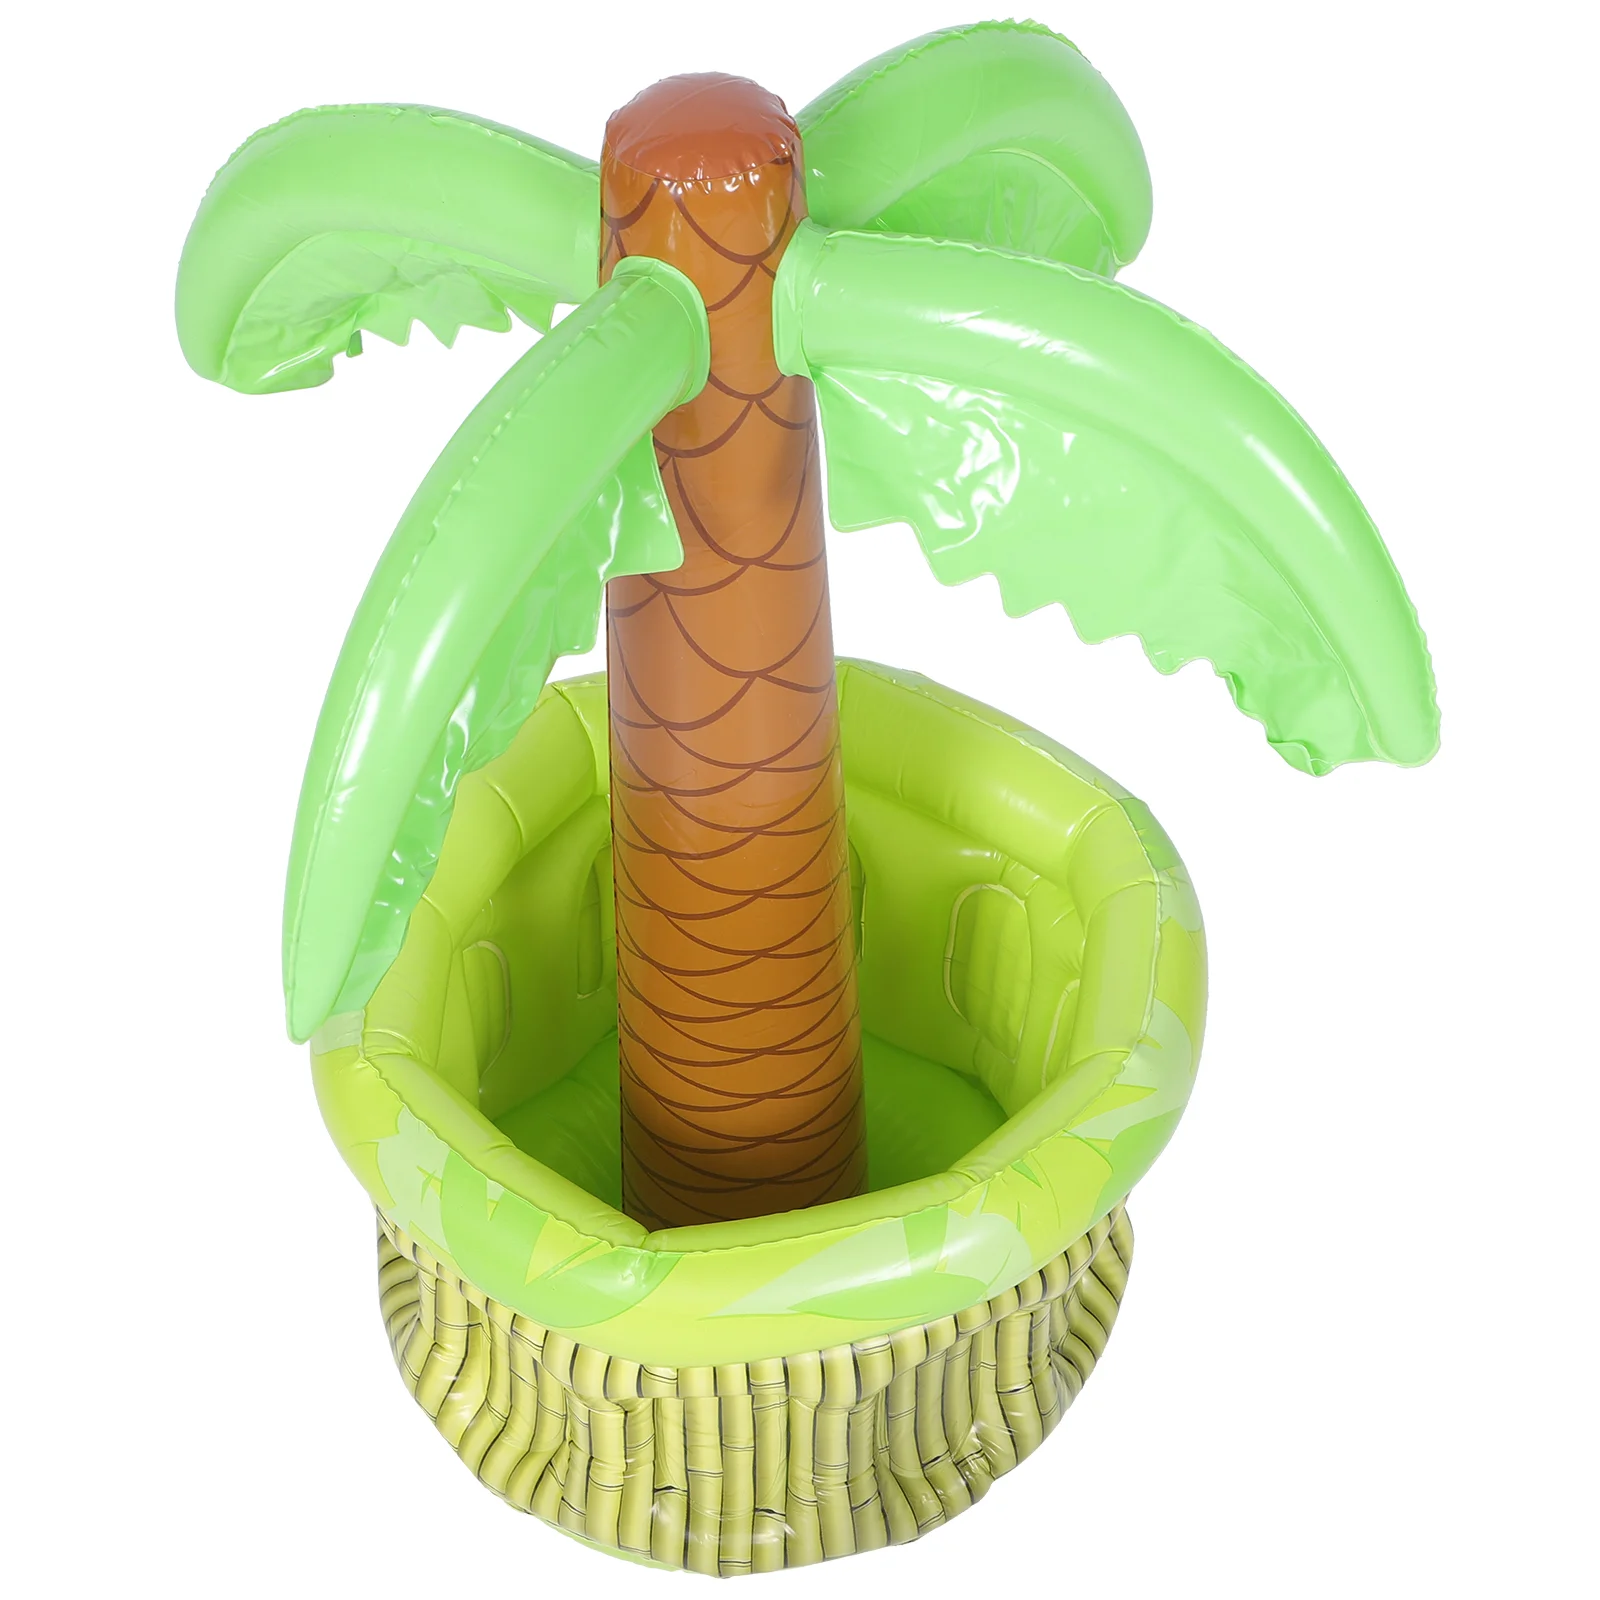 

Inflatable Ice Buffet Inflatable Serving Bar Party Palm Tree Cooler Inflatable Serving Tray Pool Float Cooler Wine Cooler Bucket